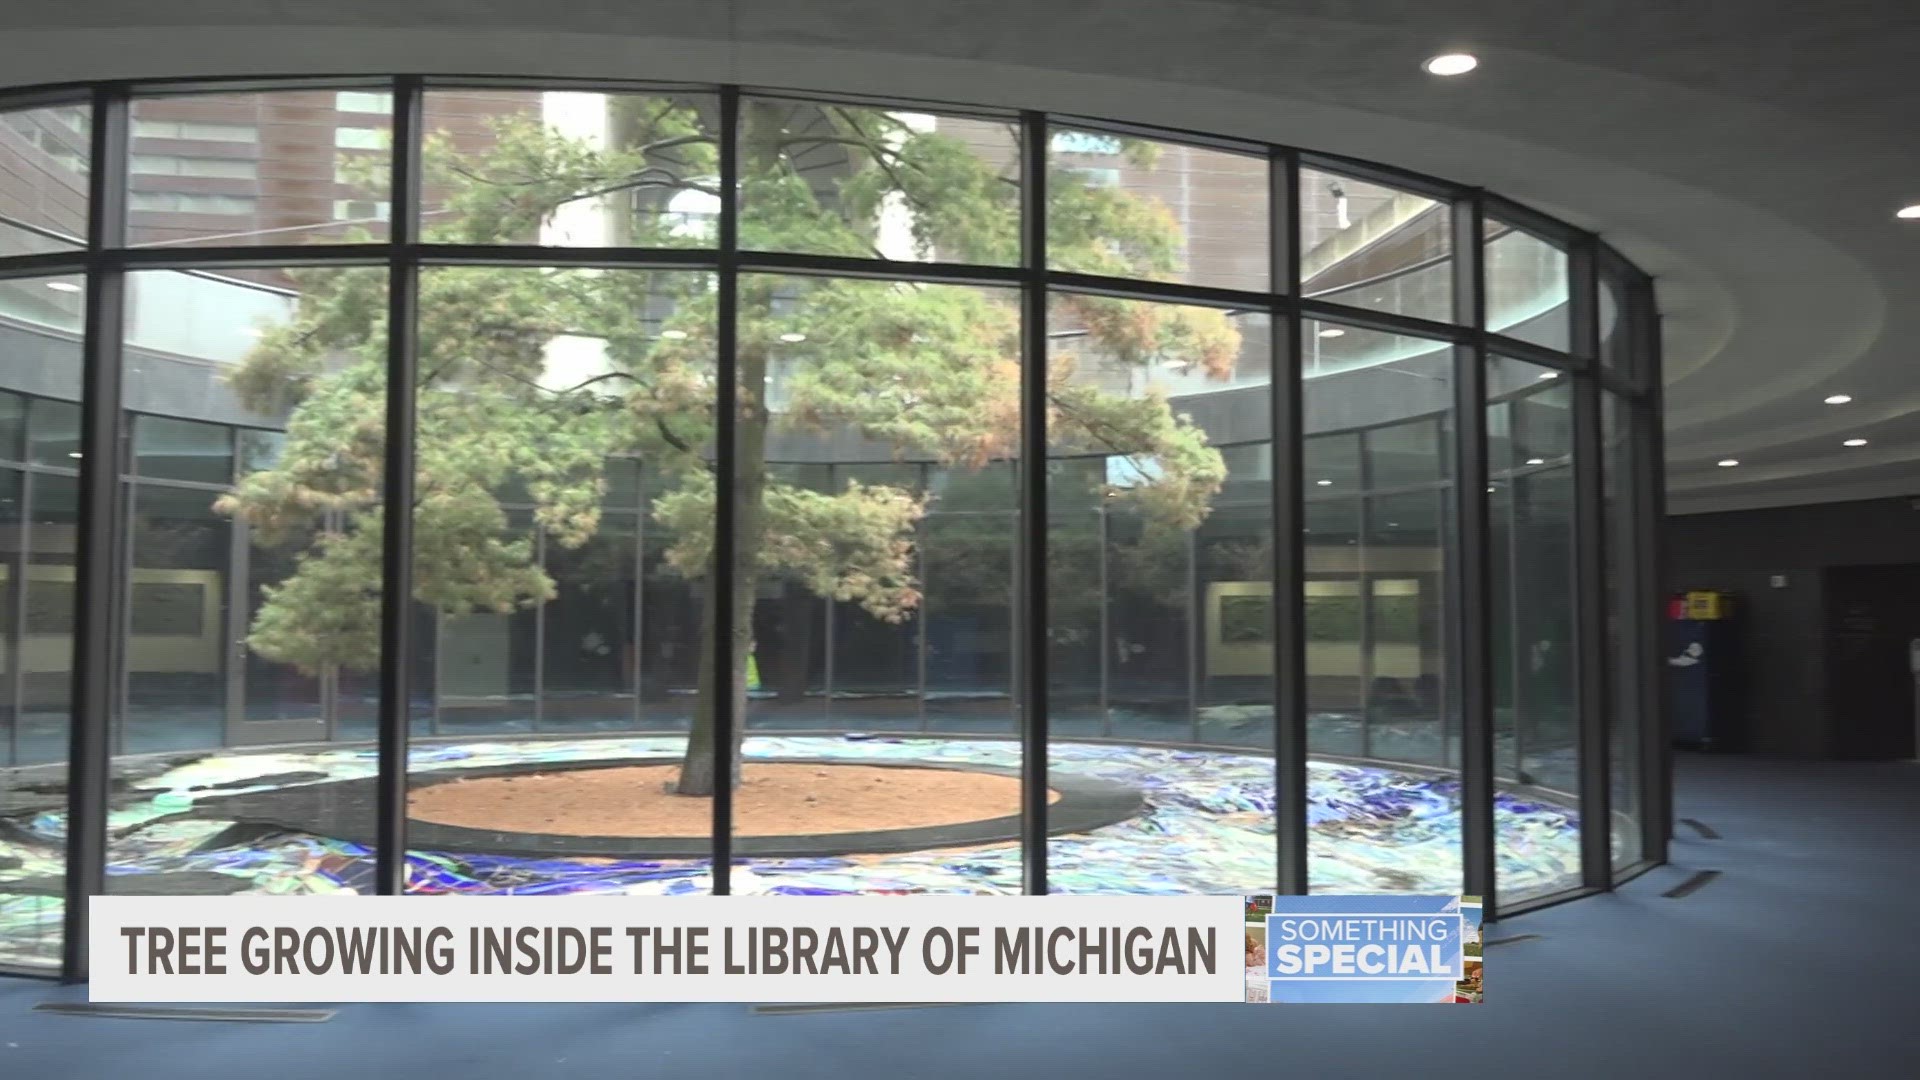 We learn about our state’s history through stories. But at the Library of Michigan in Lansing, we learn through a stories-tall tree named Carl.